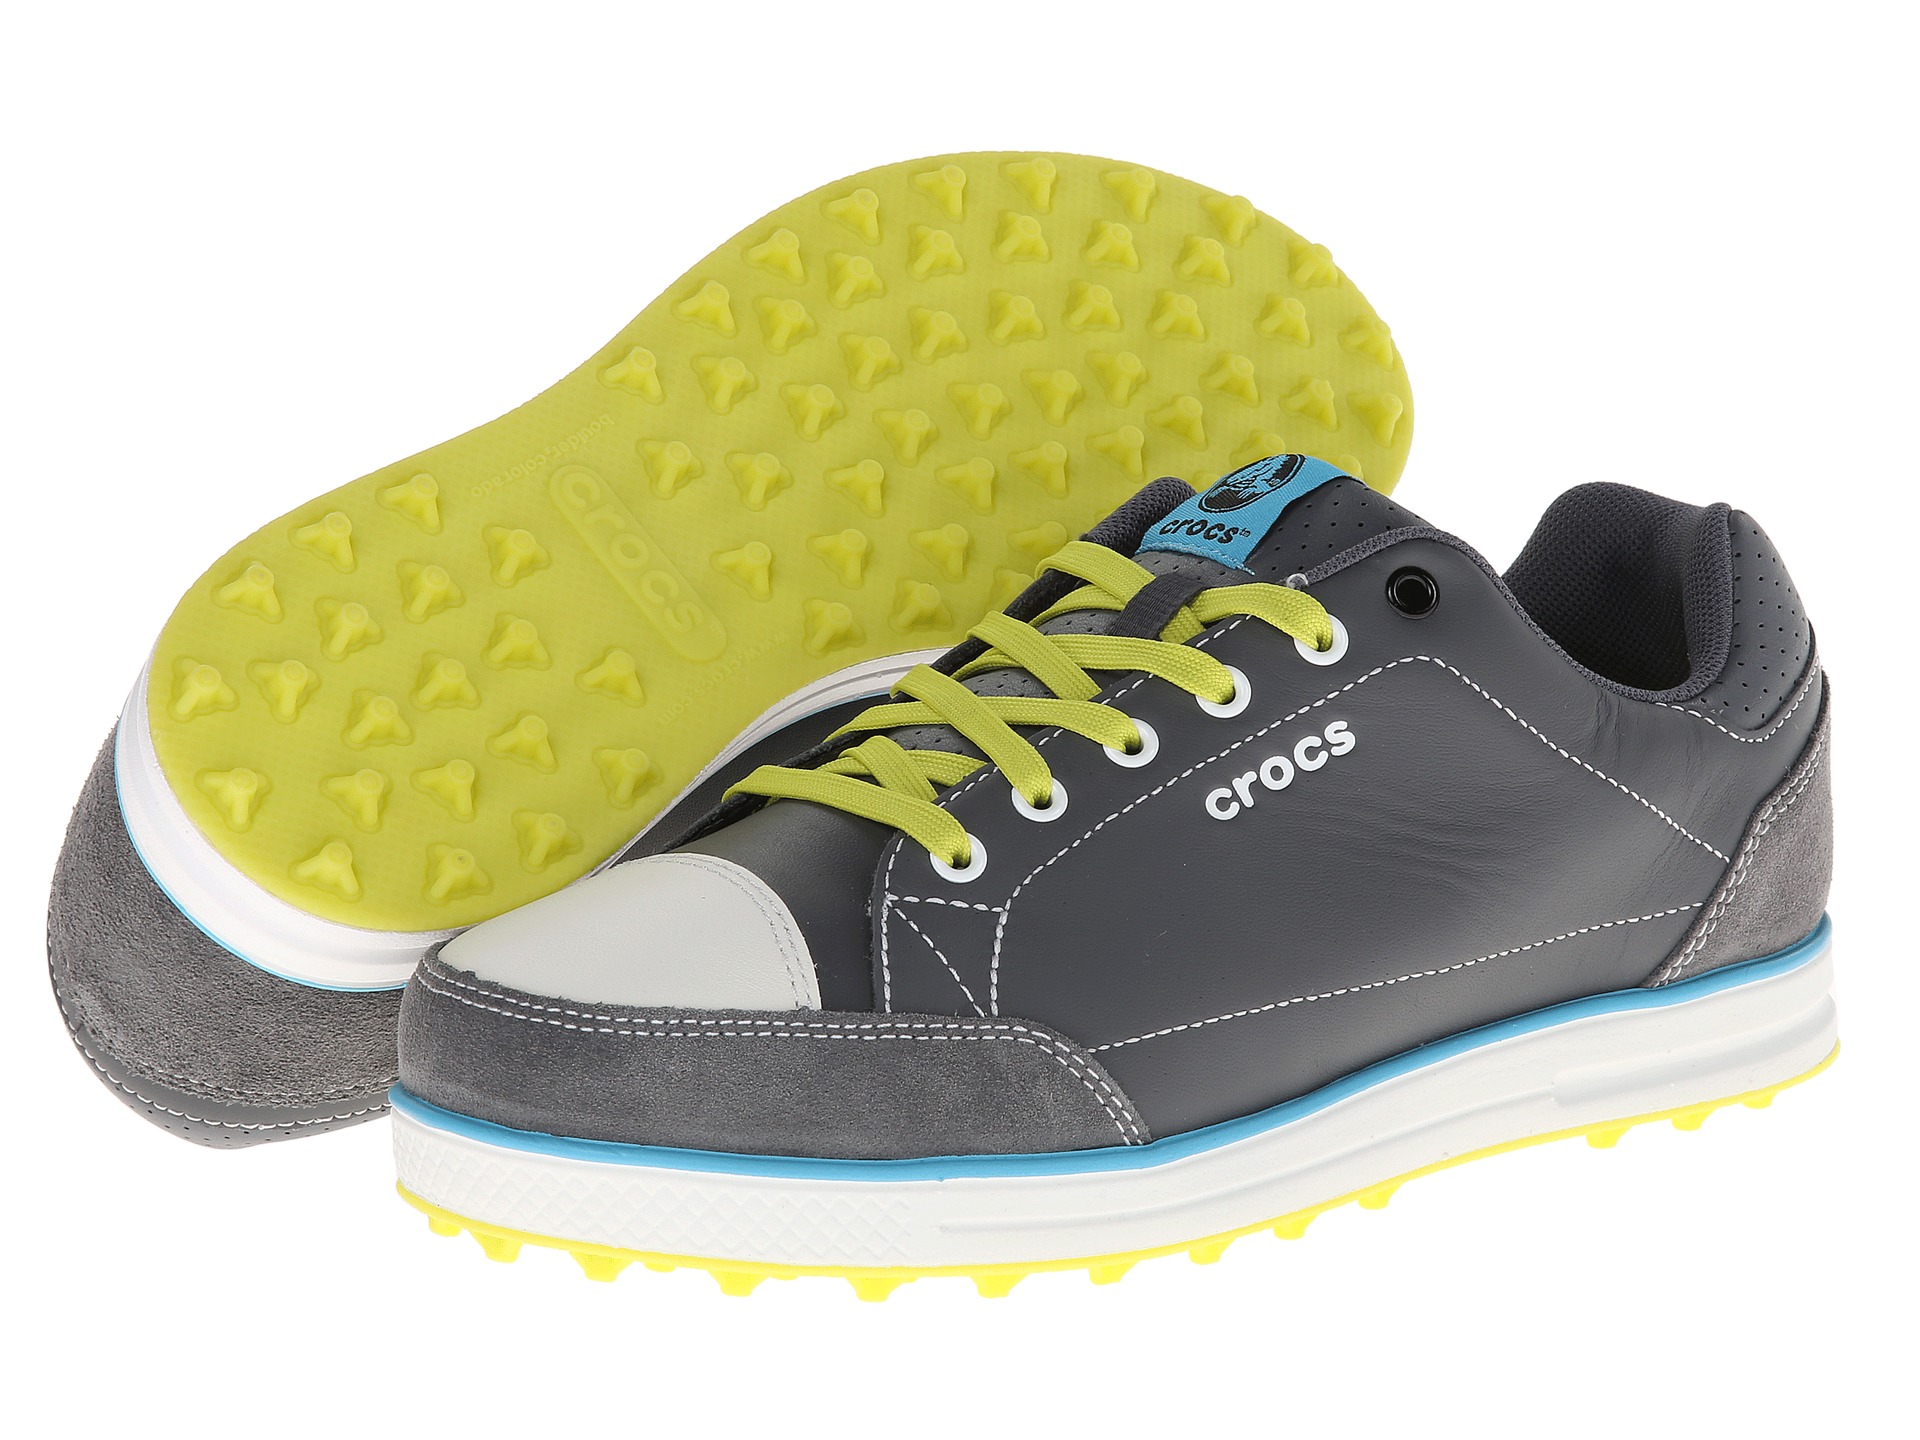 ... Karlson Golf Shoe M Charcoal Citrus, Shoes | Shipped Free at Zappos